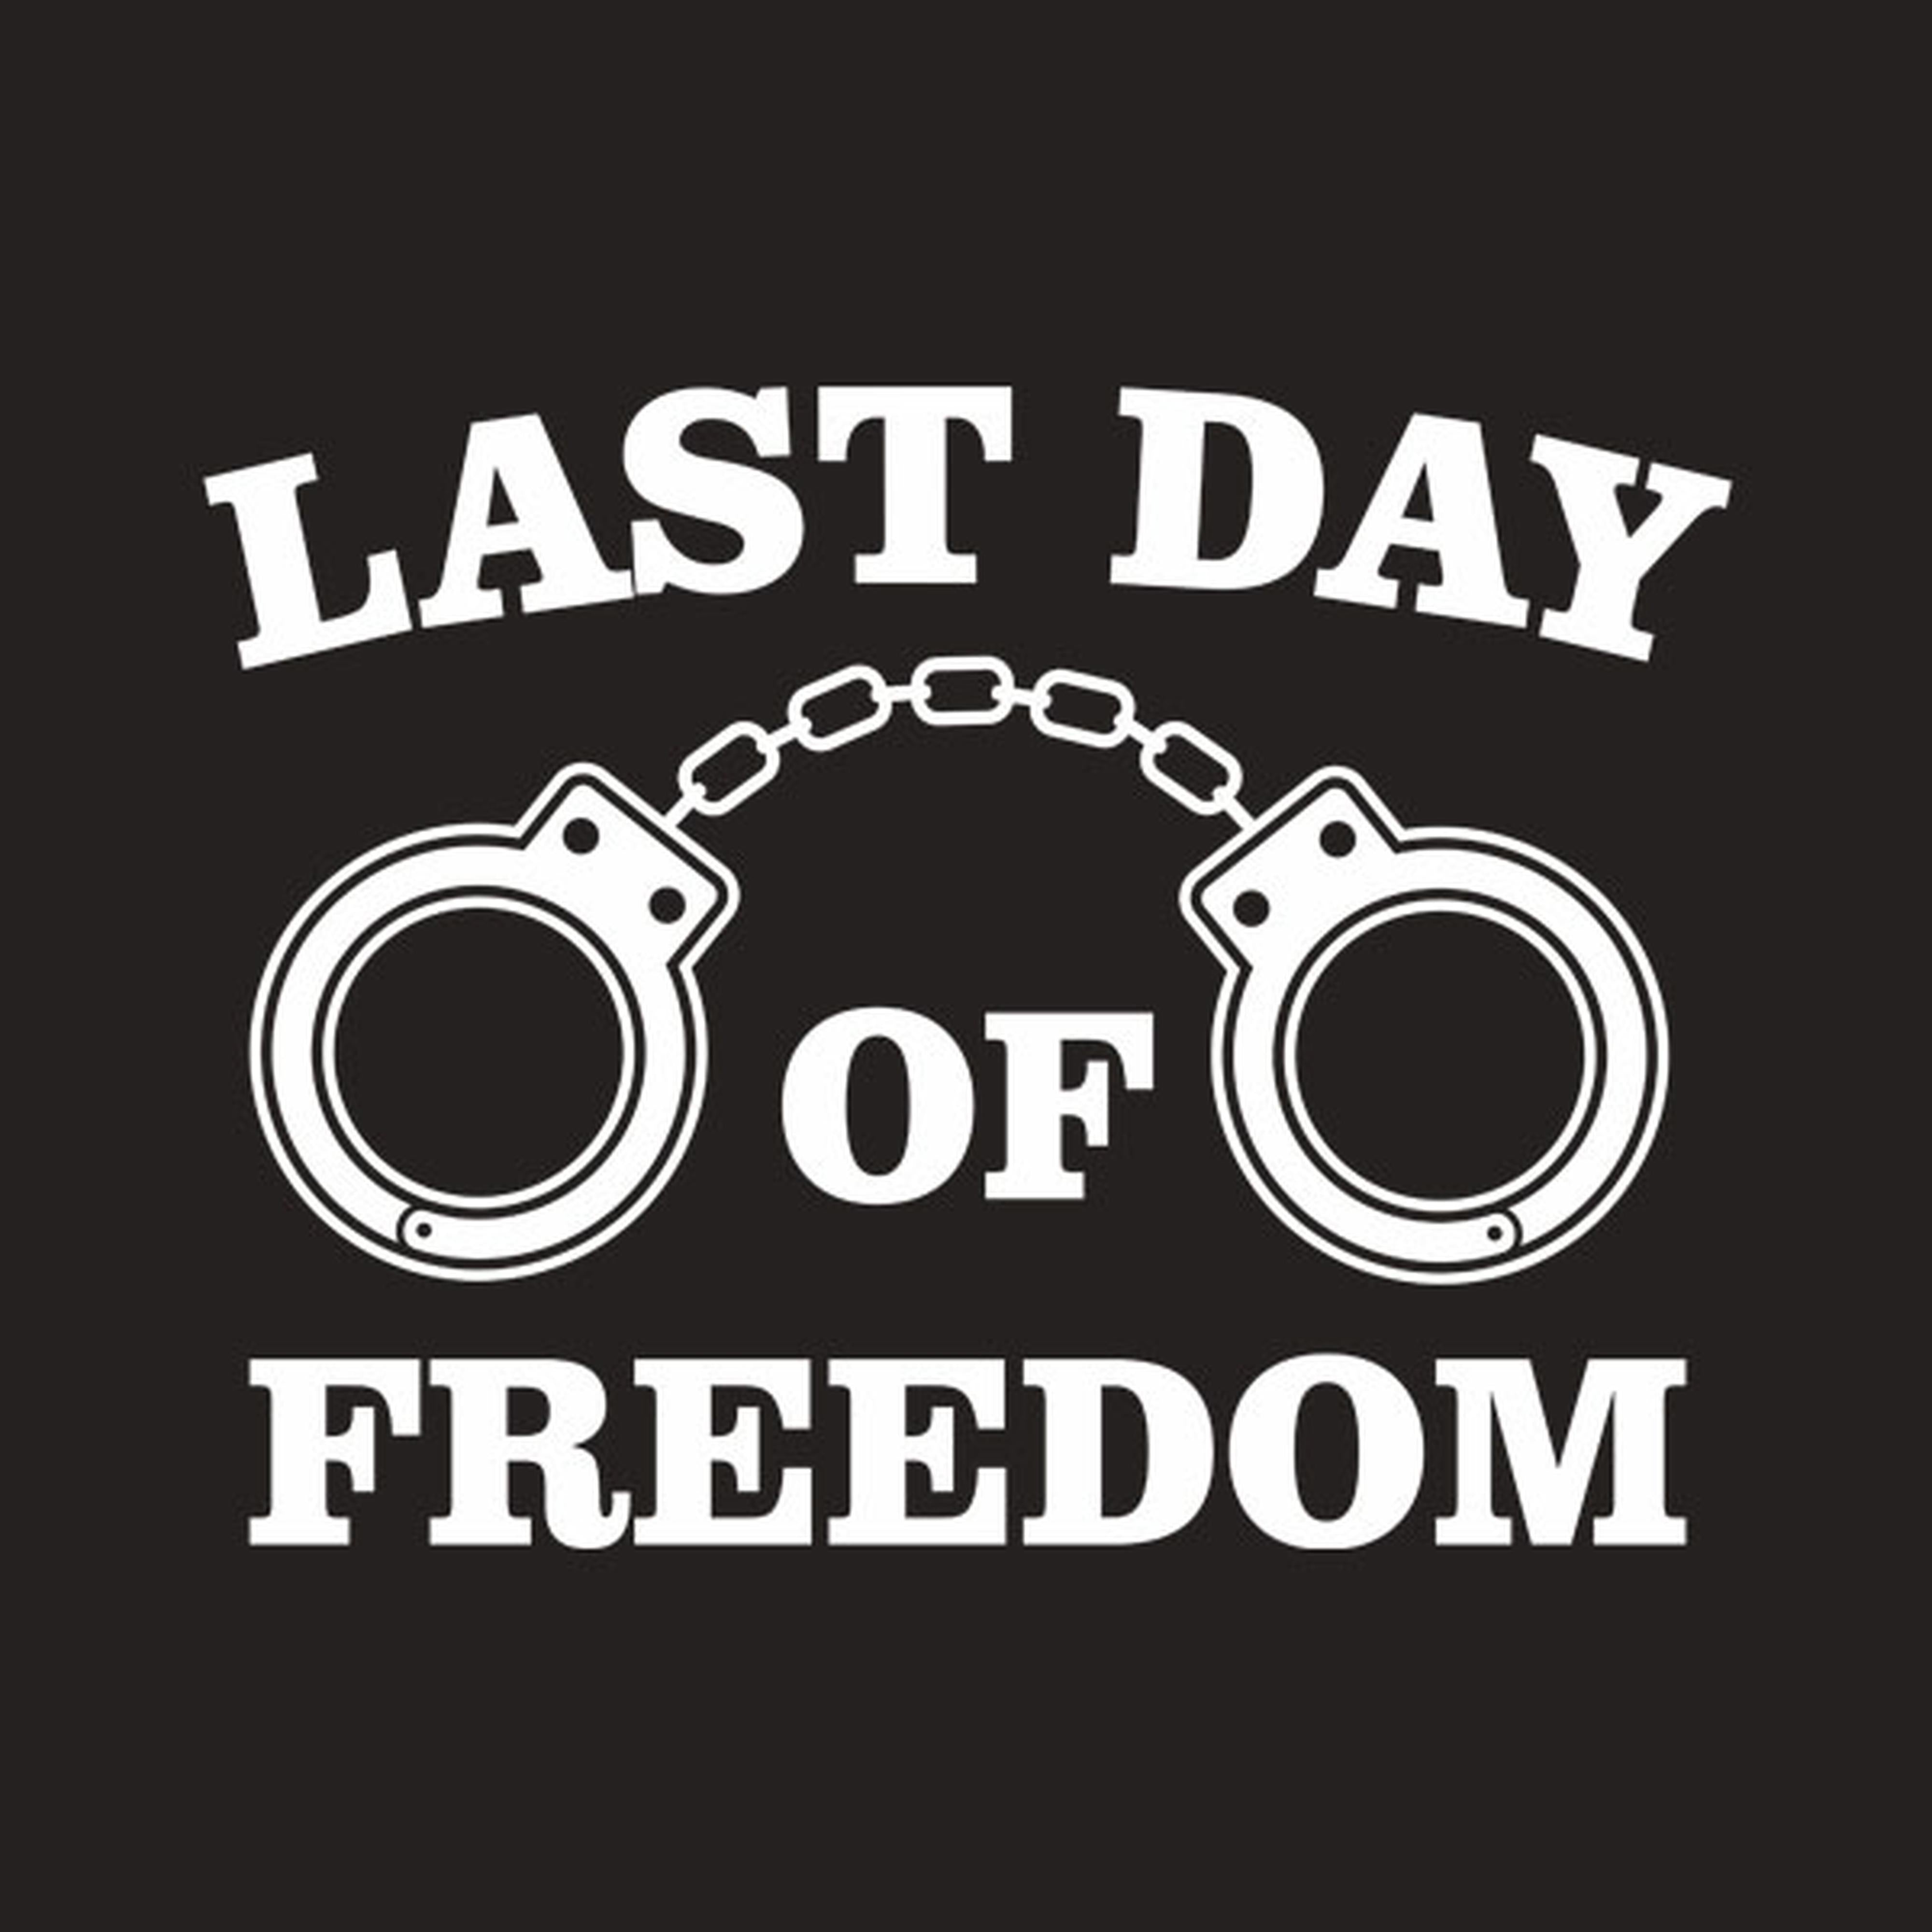 Last day of freedom - T-shirt